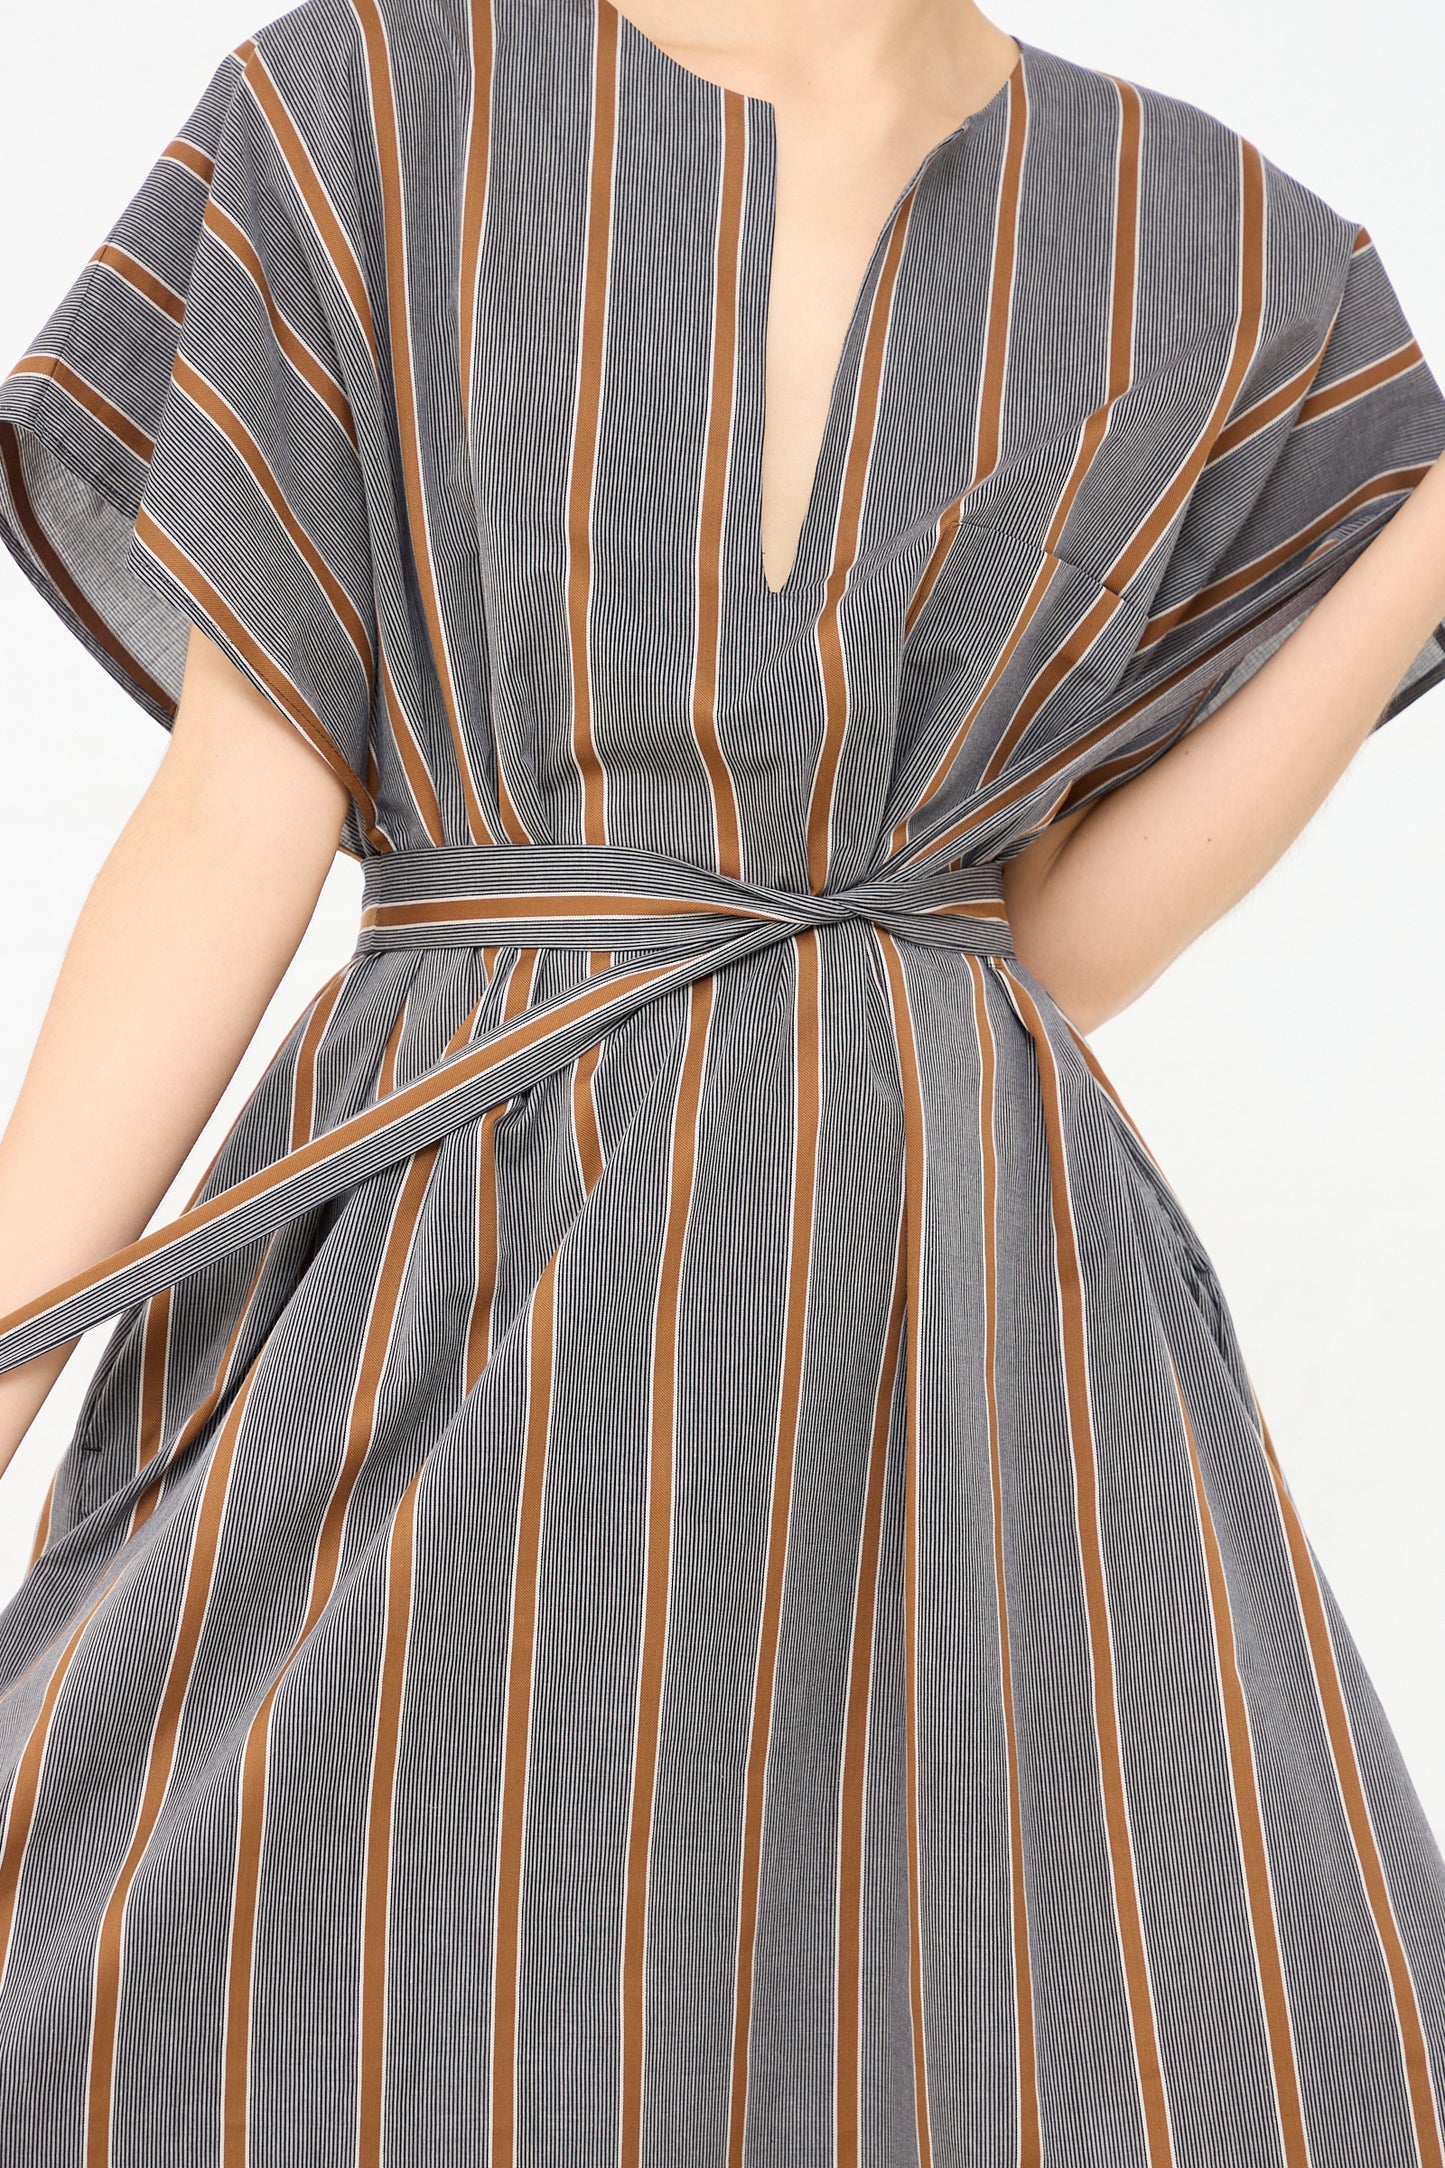 The model is wearing an oversized Cotton Caftan in Striped Black and Noisette (Brown) by Cristaseya. Up close view of fabric belt details.